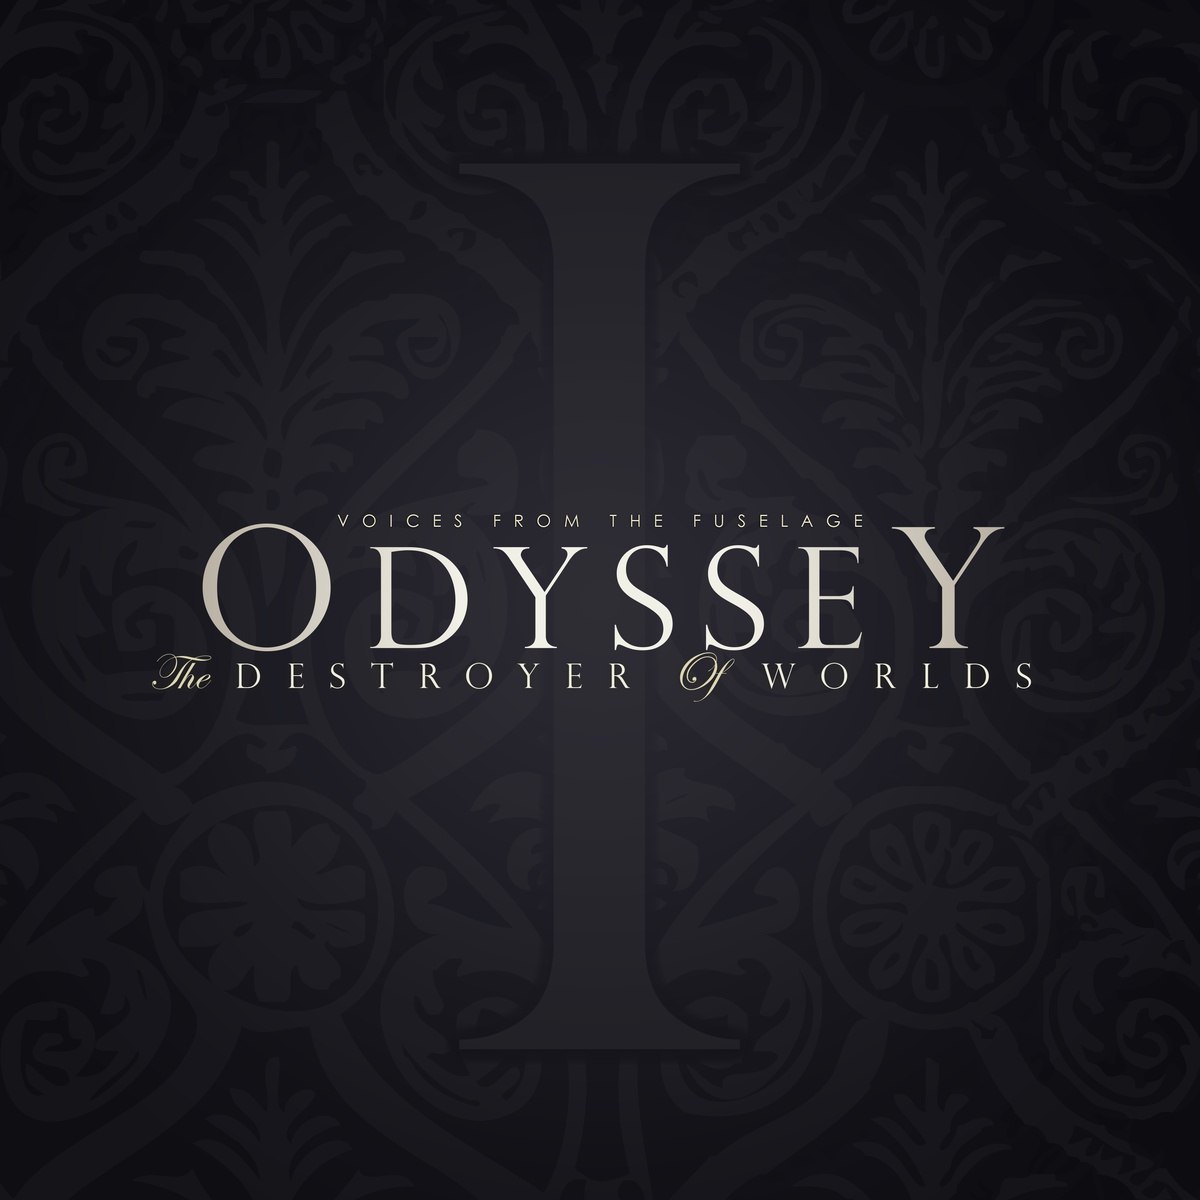 Voices From the Fuselage - Odyssey: The Destroyer of Worlds (Re-release) (2016)